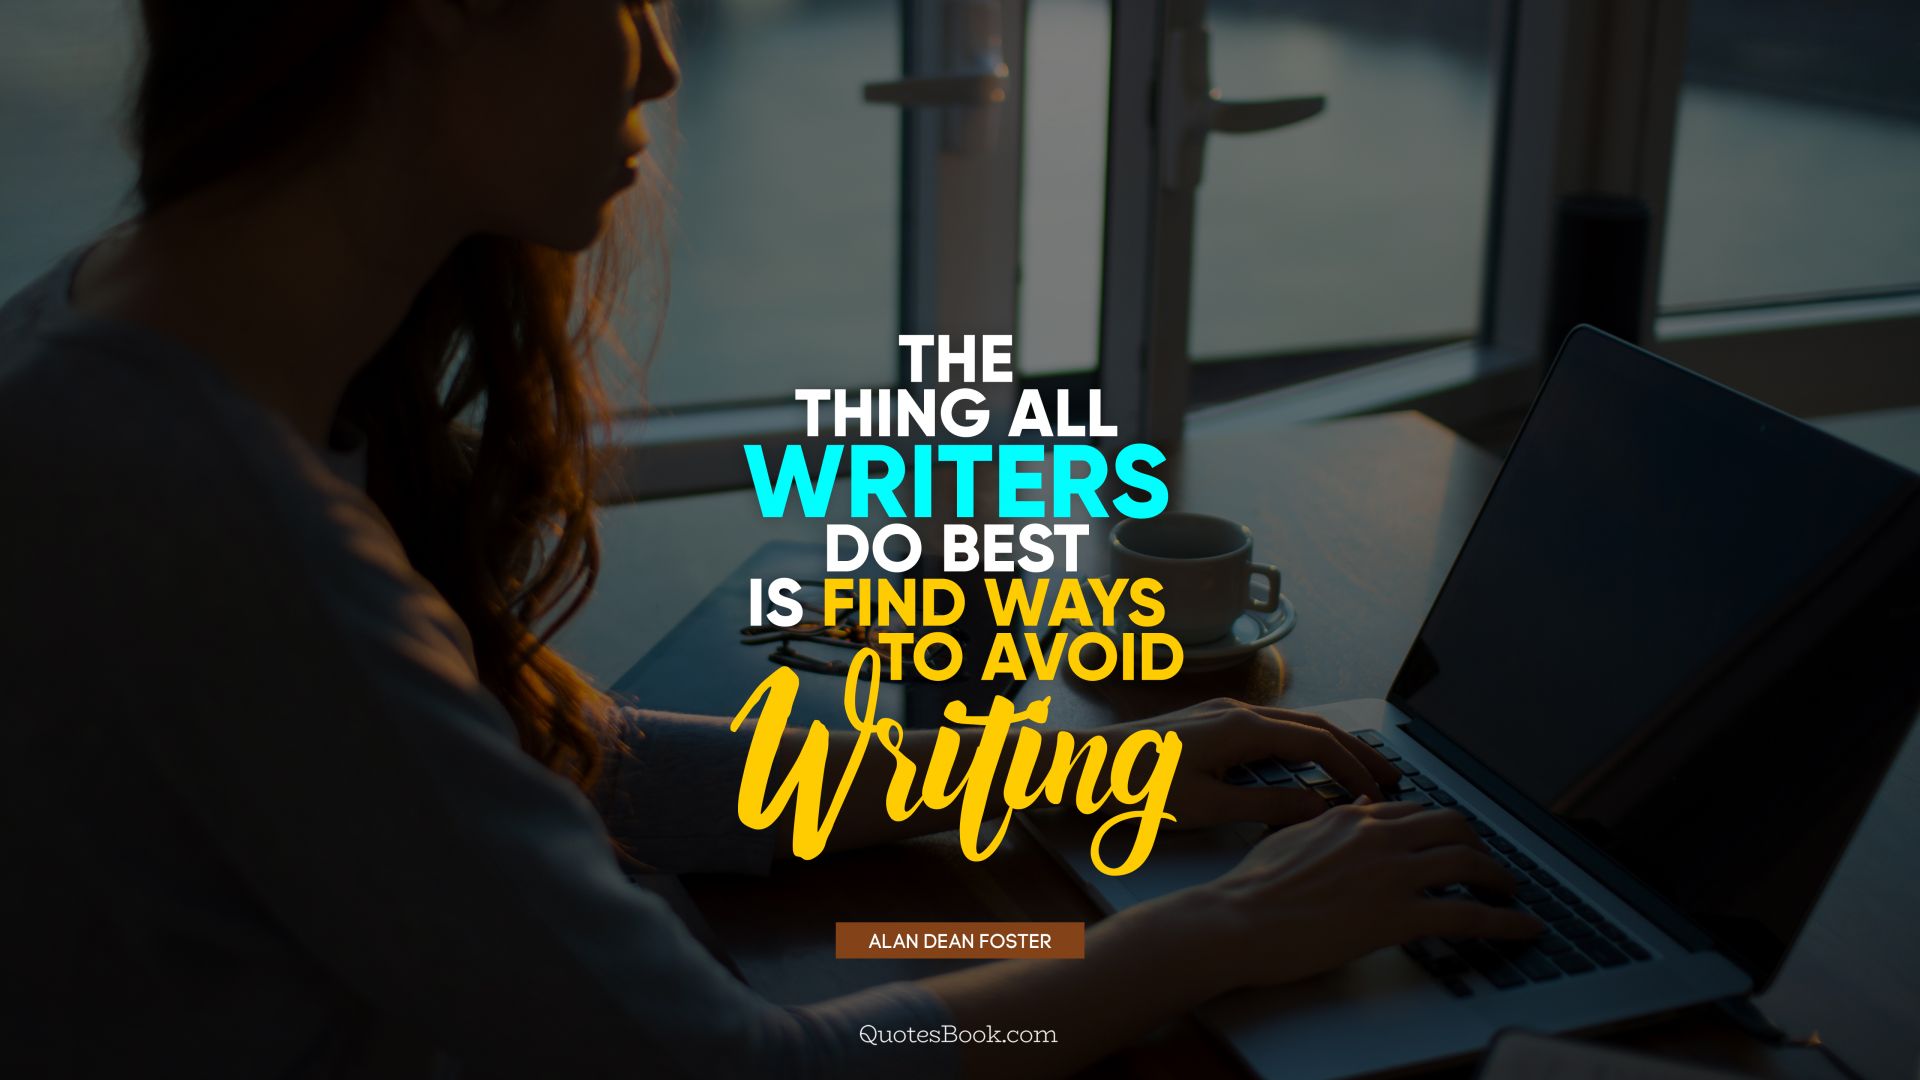 The thing all writers do best is find ways to avoid writing. - Quote by Alan Dean Foster